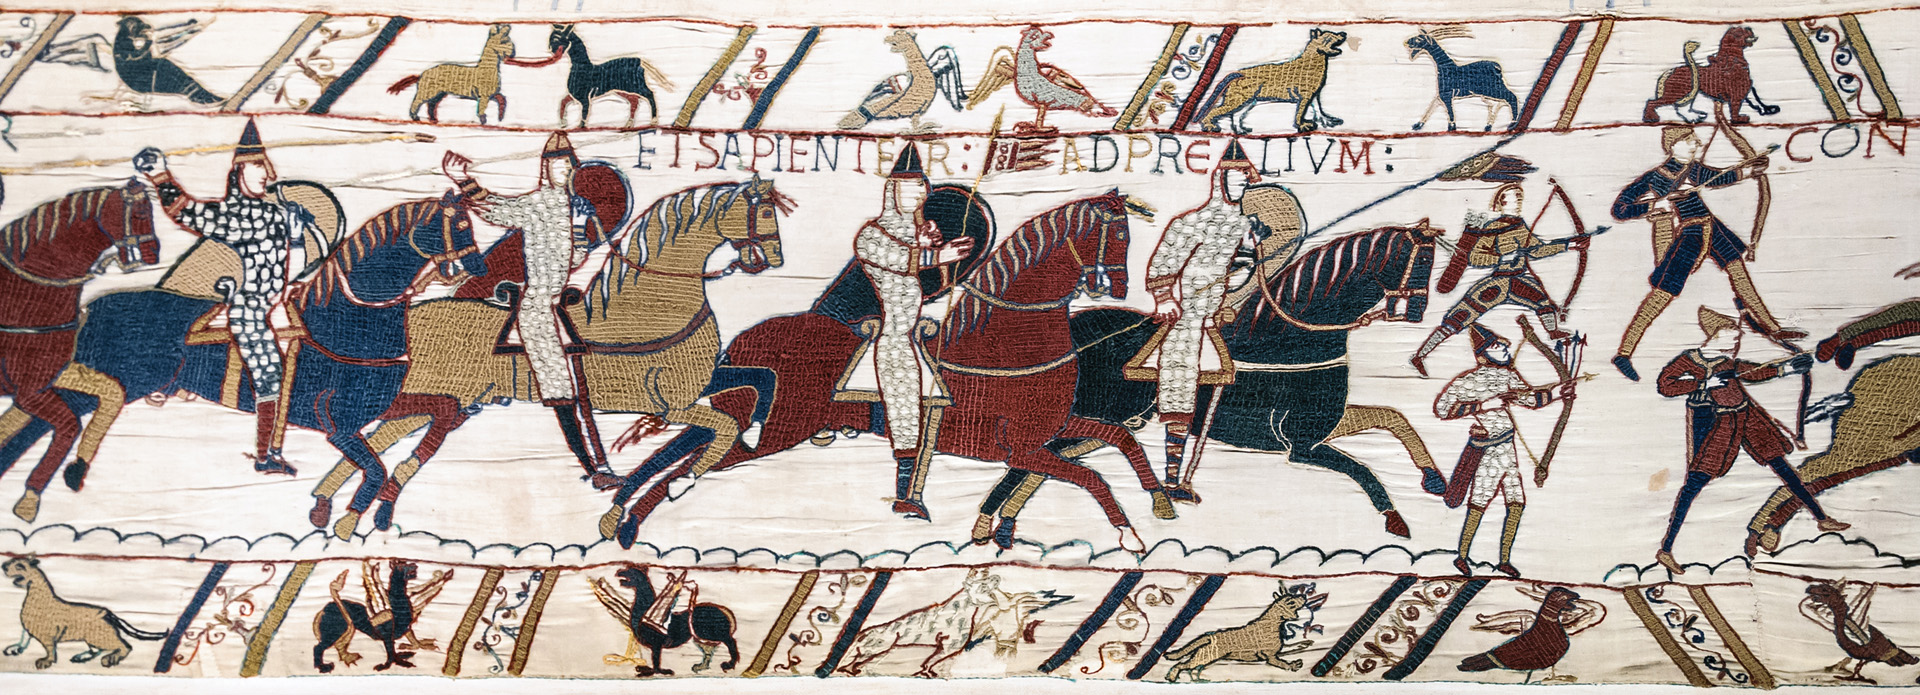 A detail from the Bayeaux Tapestry shows archers leading the Norman attack at the Battle of Hastings in 1066. A steady stream of arrows helped break up the tightly packed Anglo-Saxon formation. 